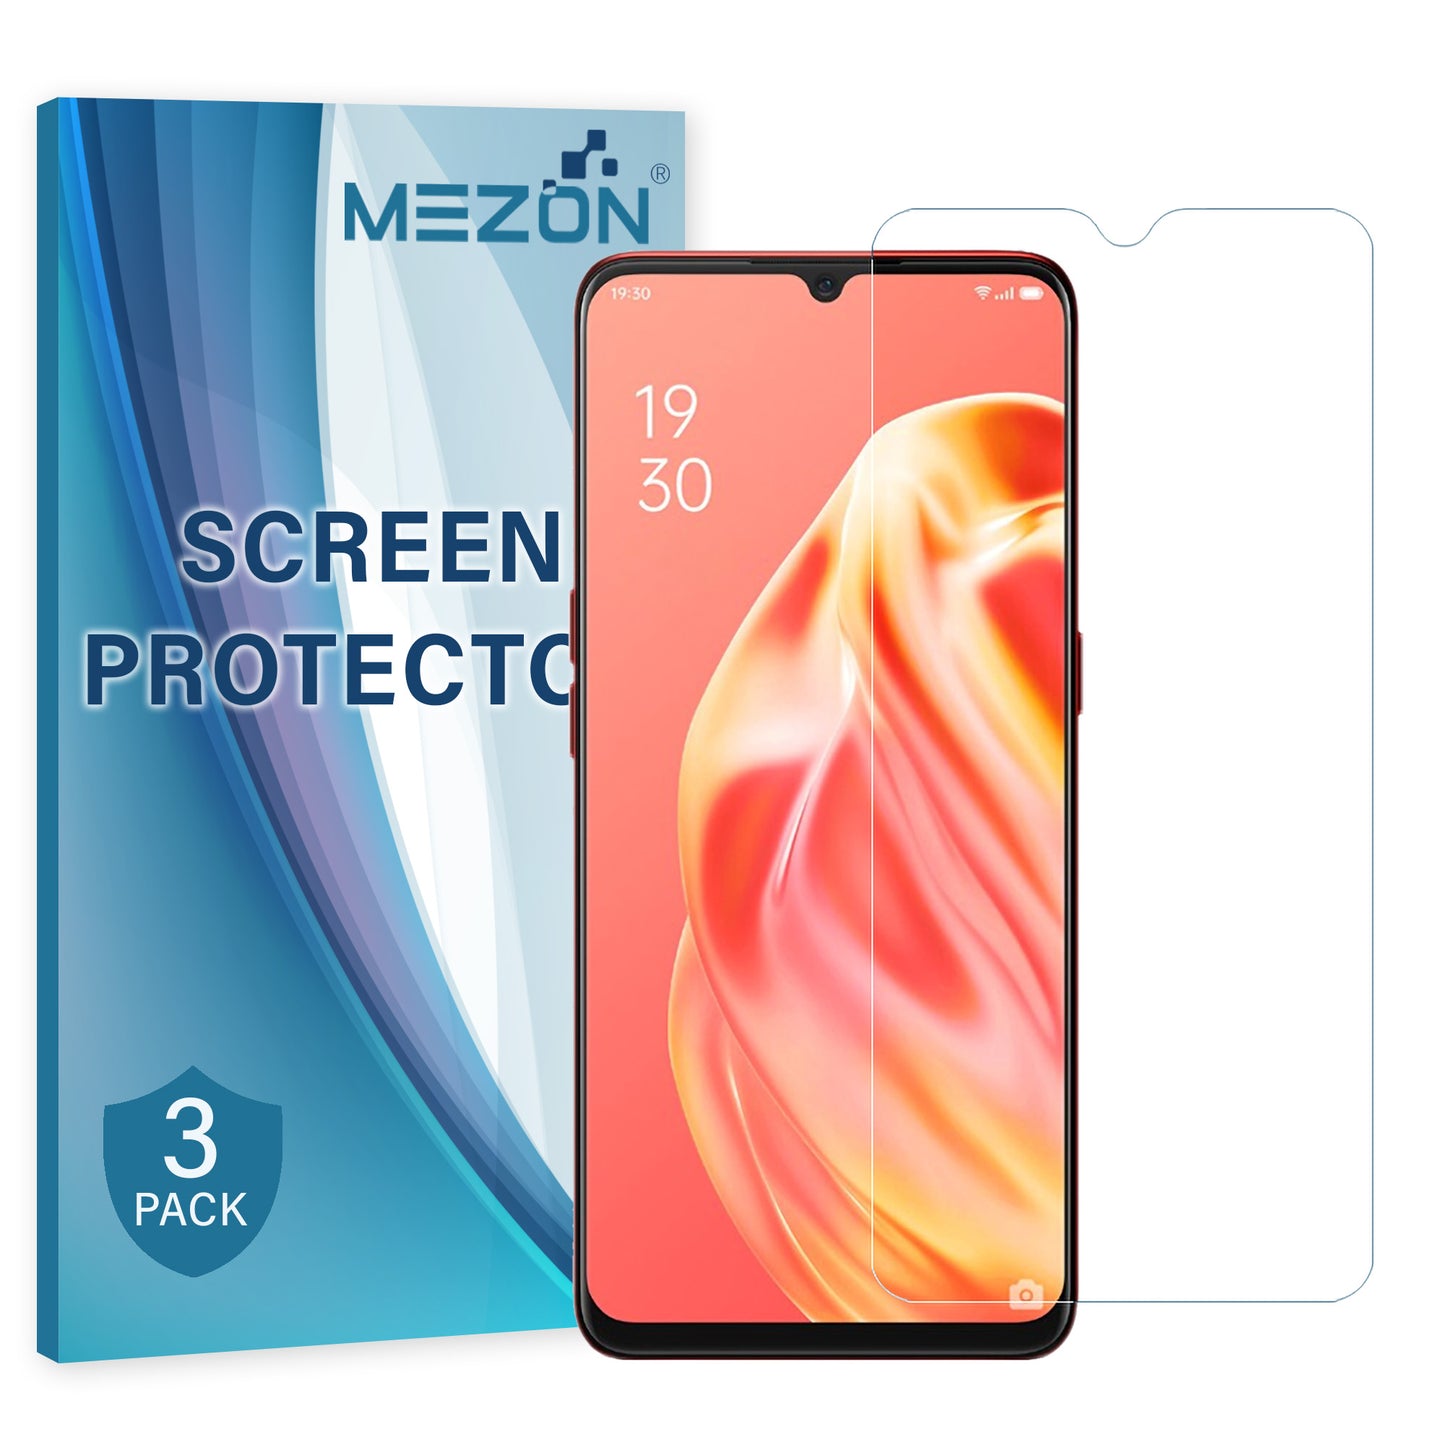 [3 Pack] MEZON Vivo Y20s Ultra Clear Screen Protector Case Friendly Film (Vivo Y20s, Clear)